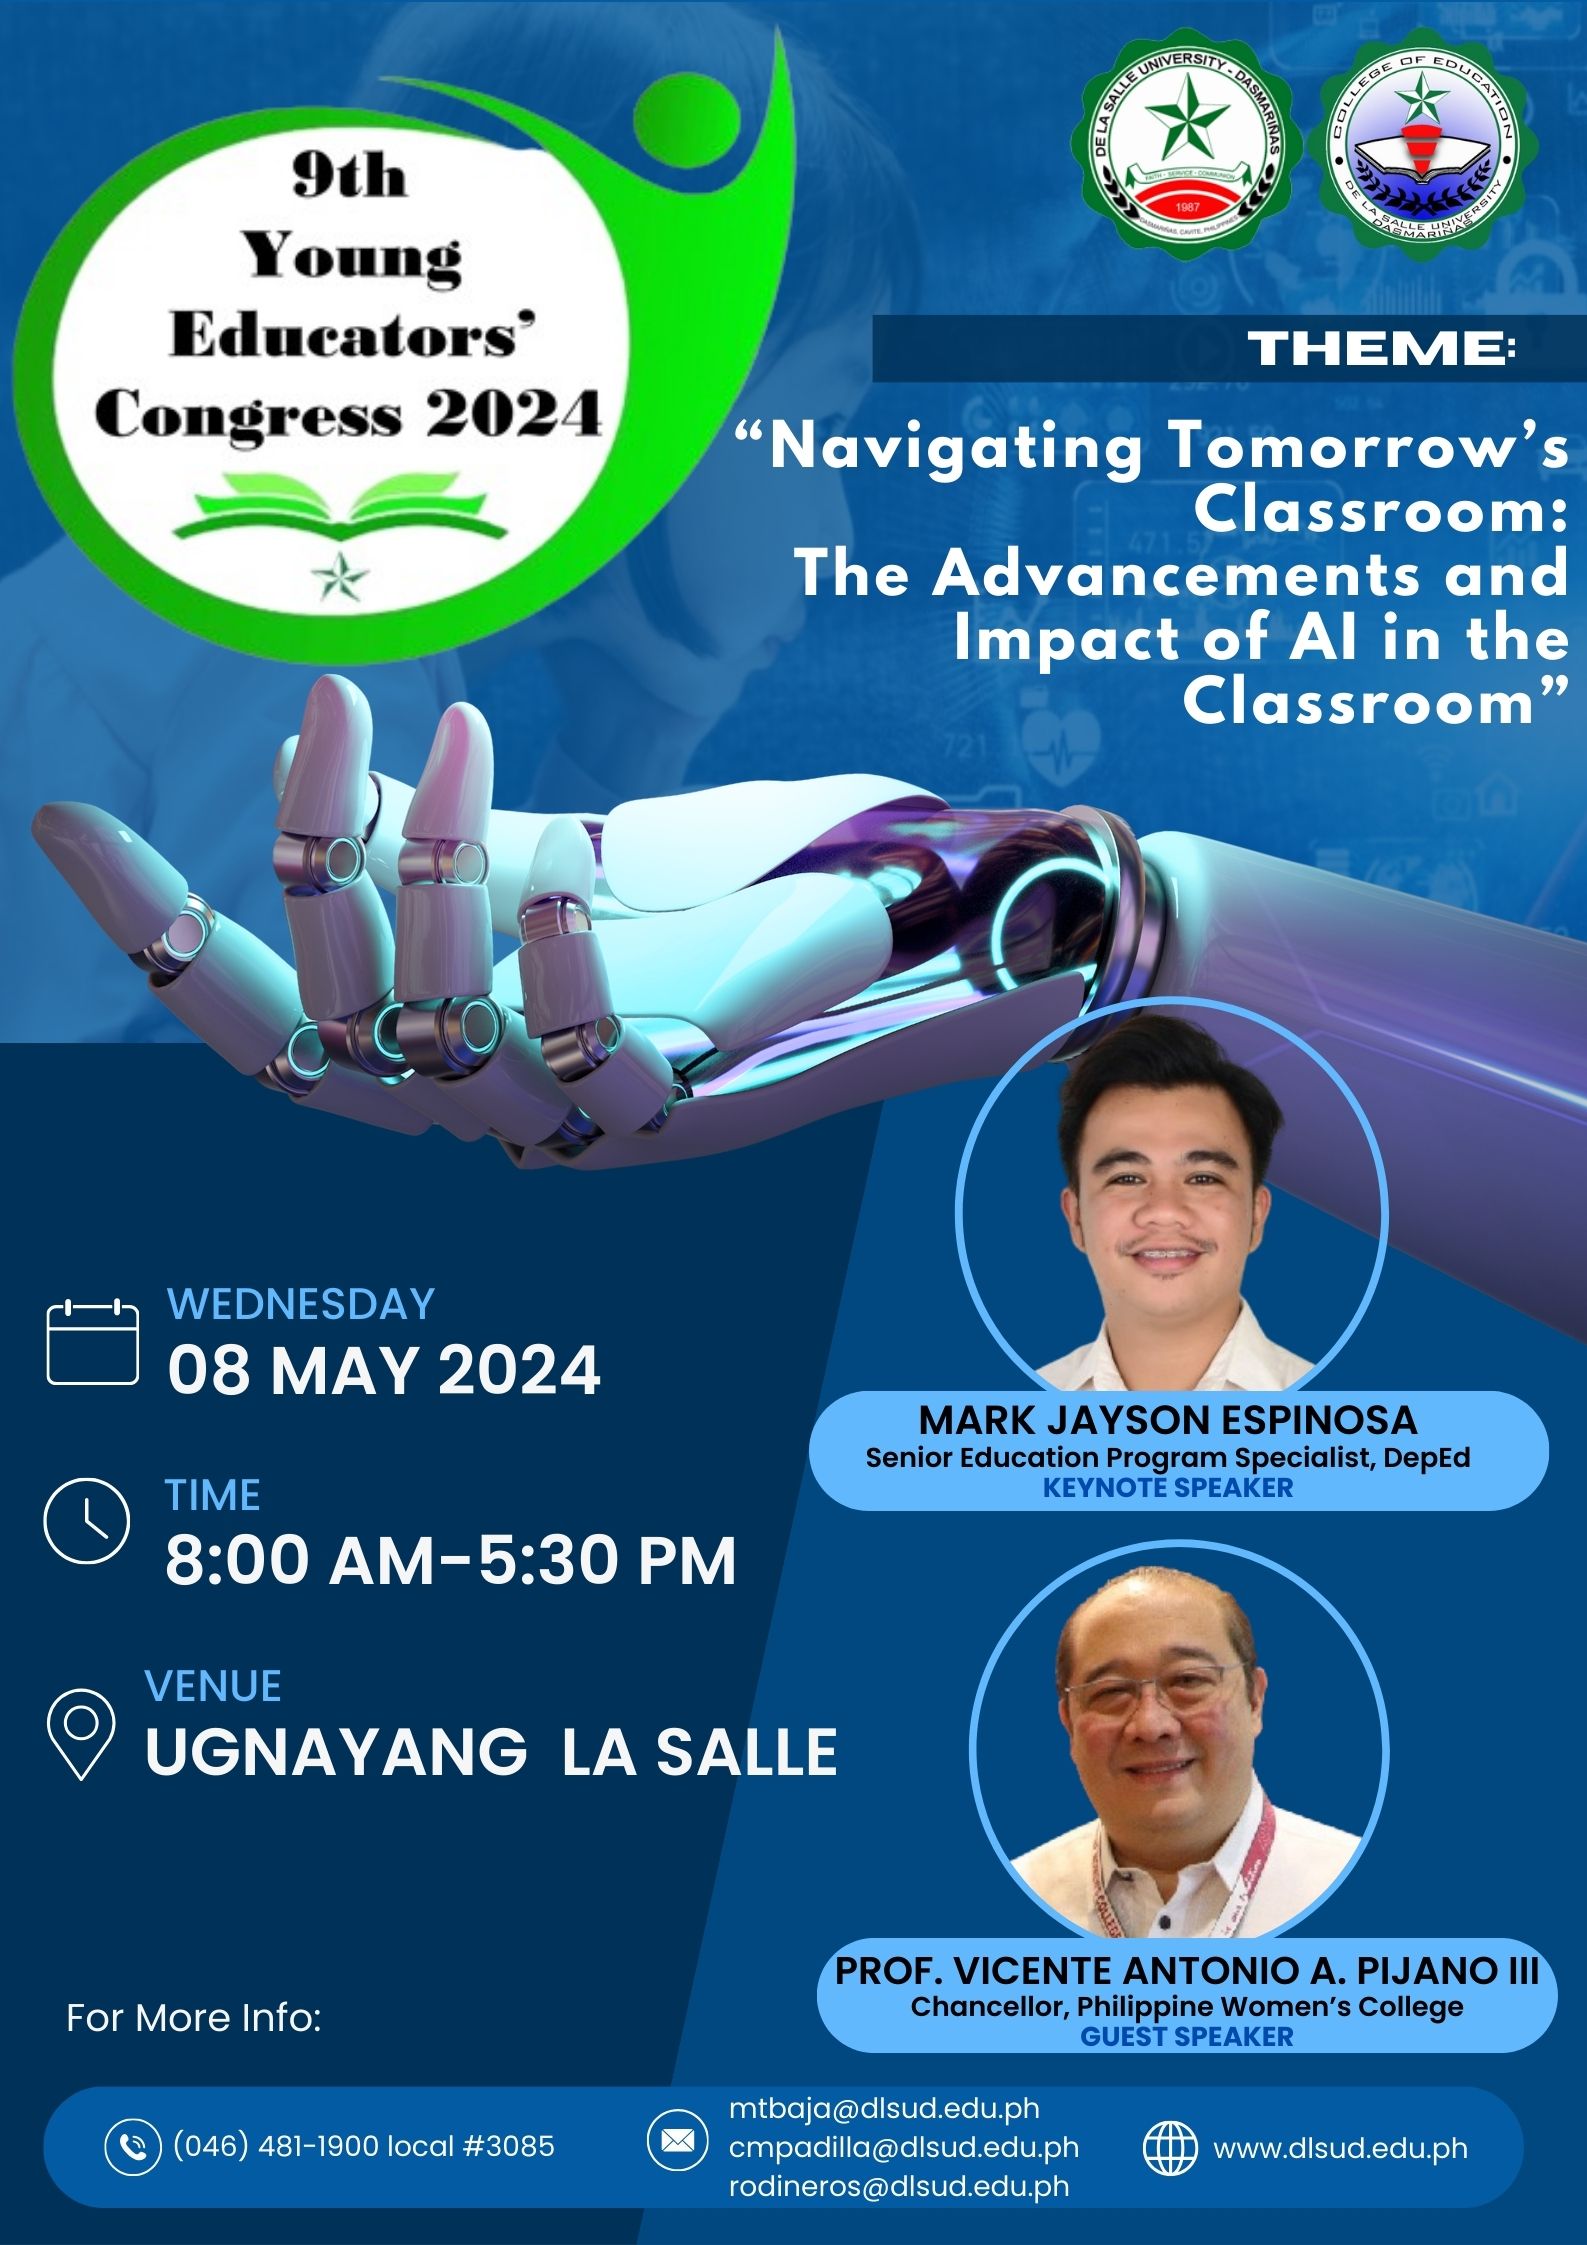 9th Young Educators' Congress on May 8  